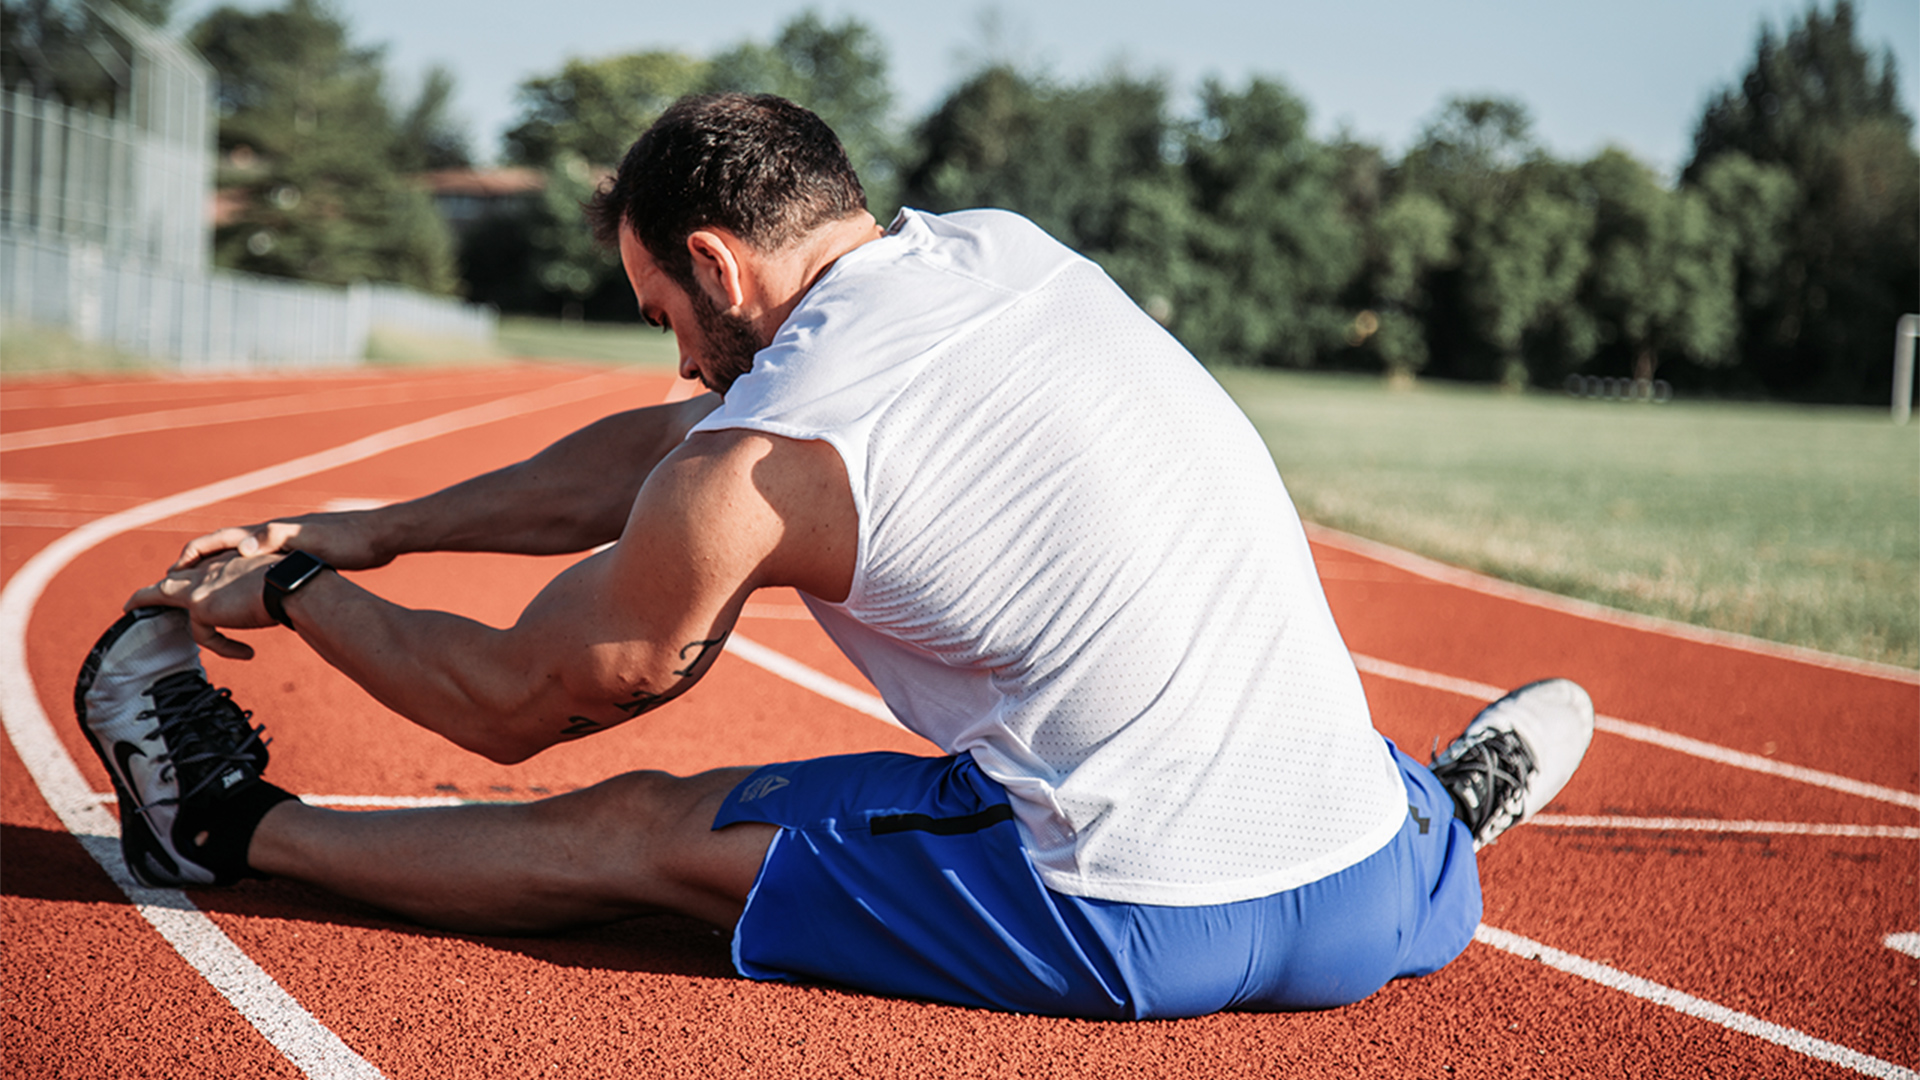 An athlete stretches on a running track